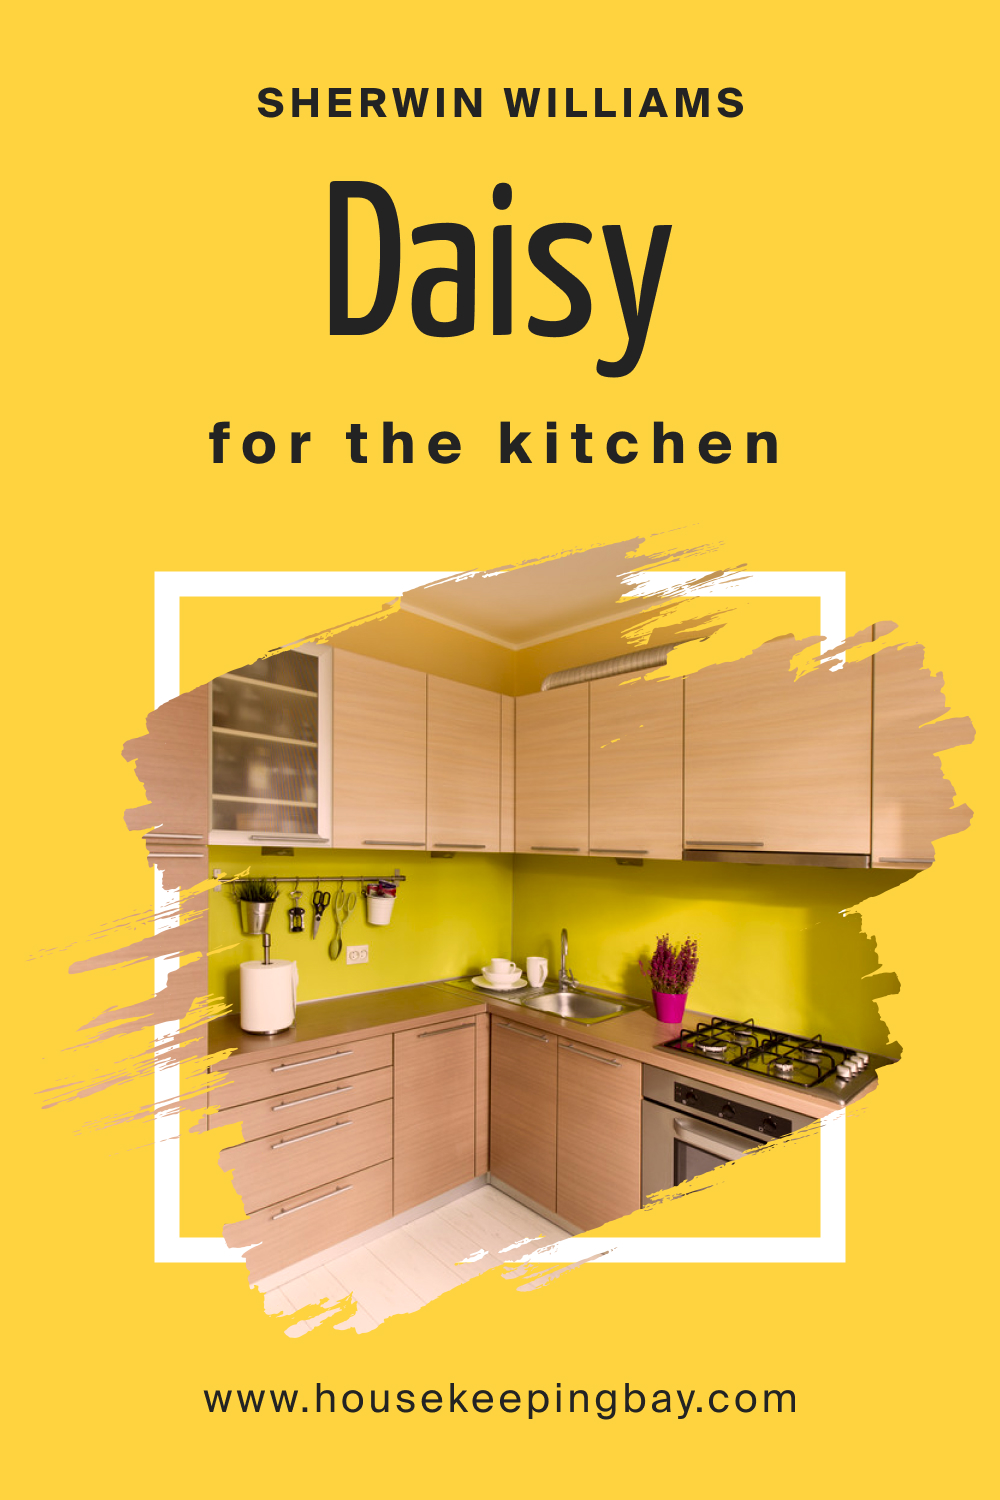 Sherwin Williams. Daisy SW 6910 For the Kitchens